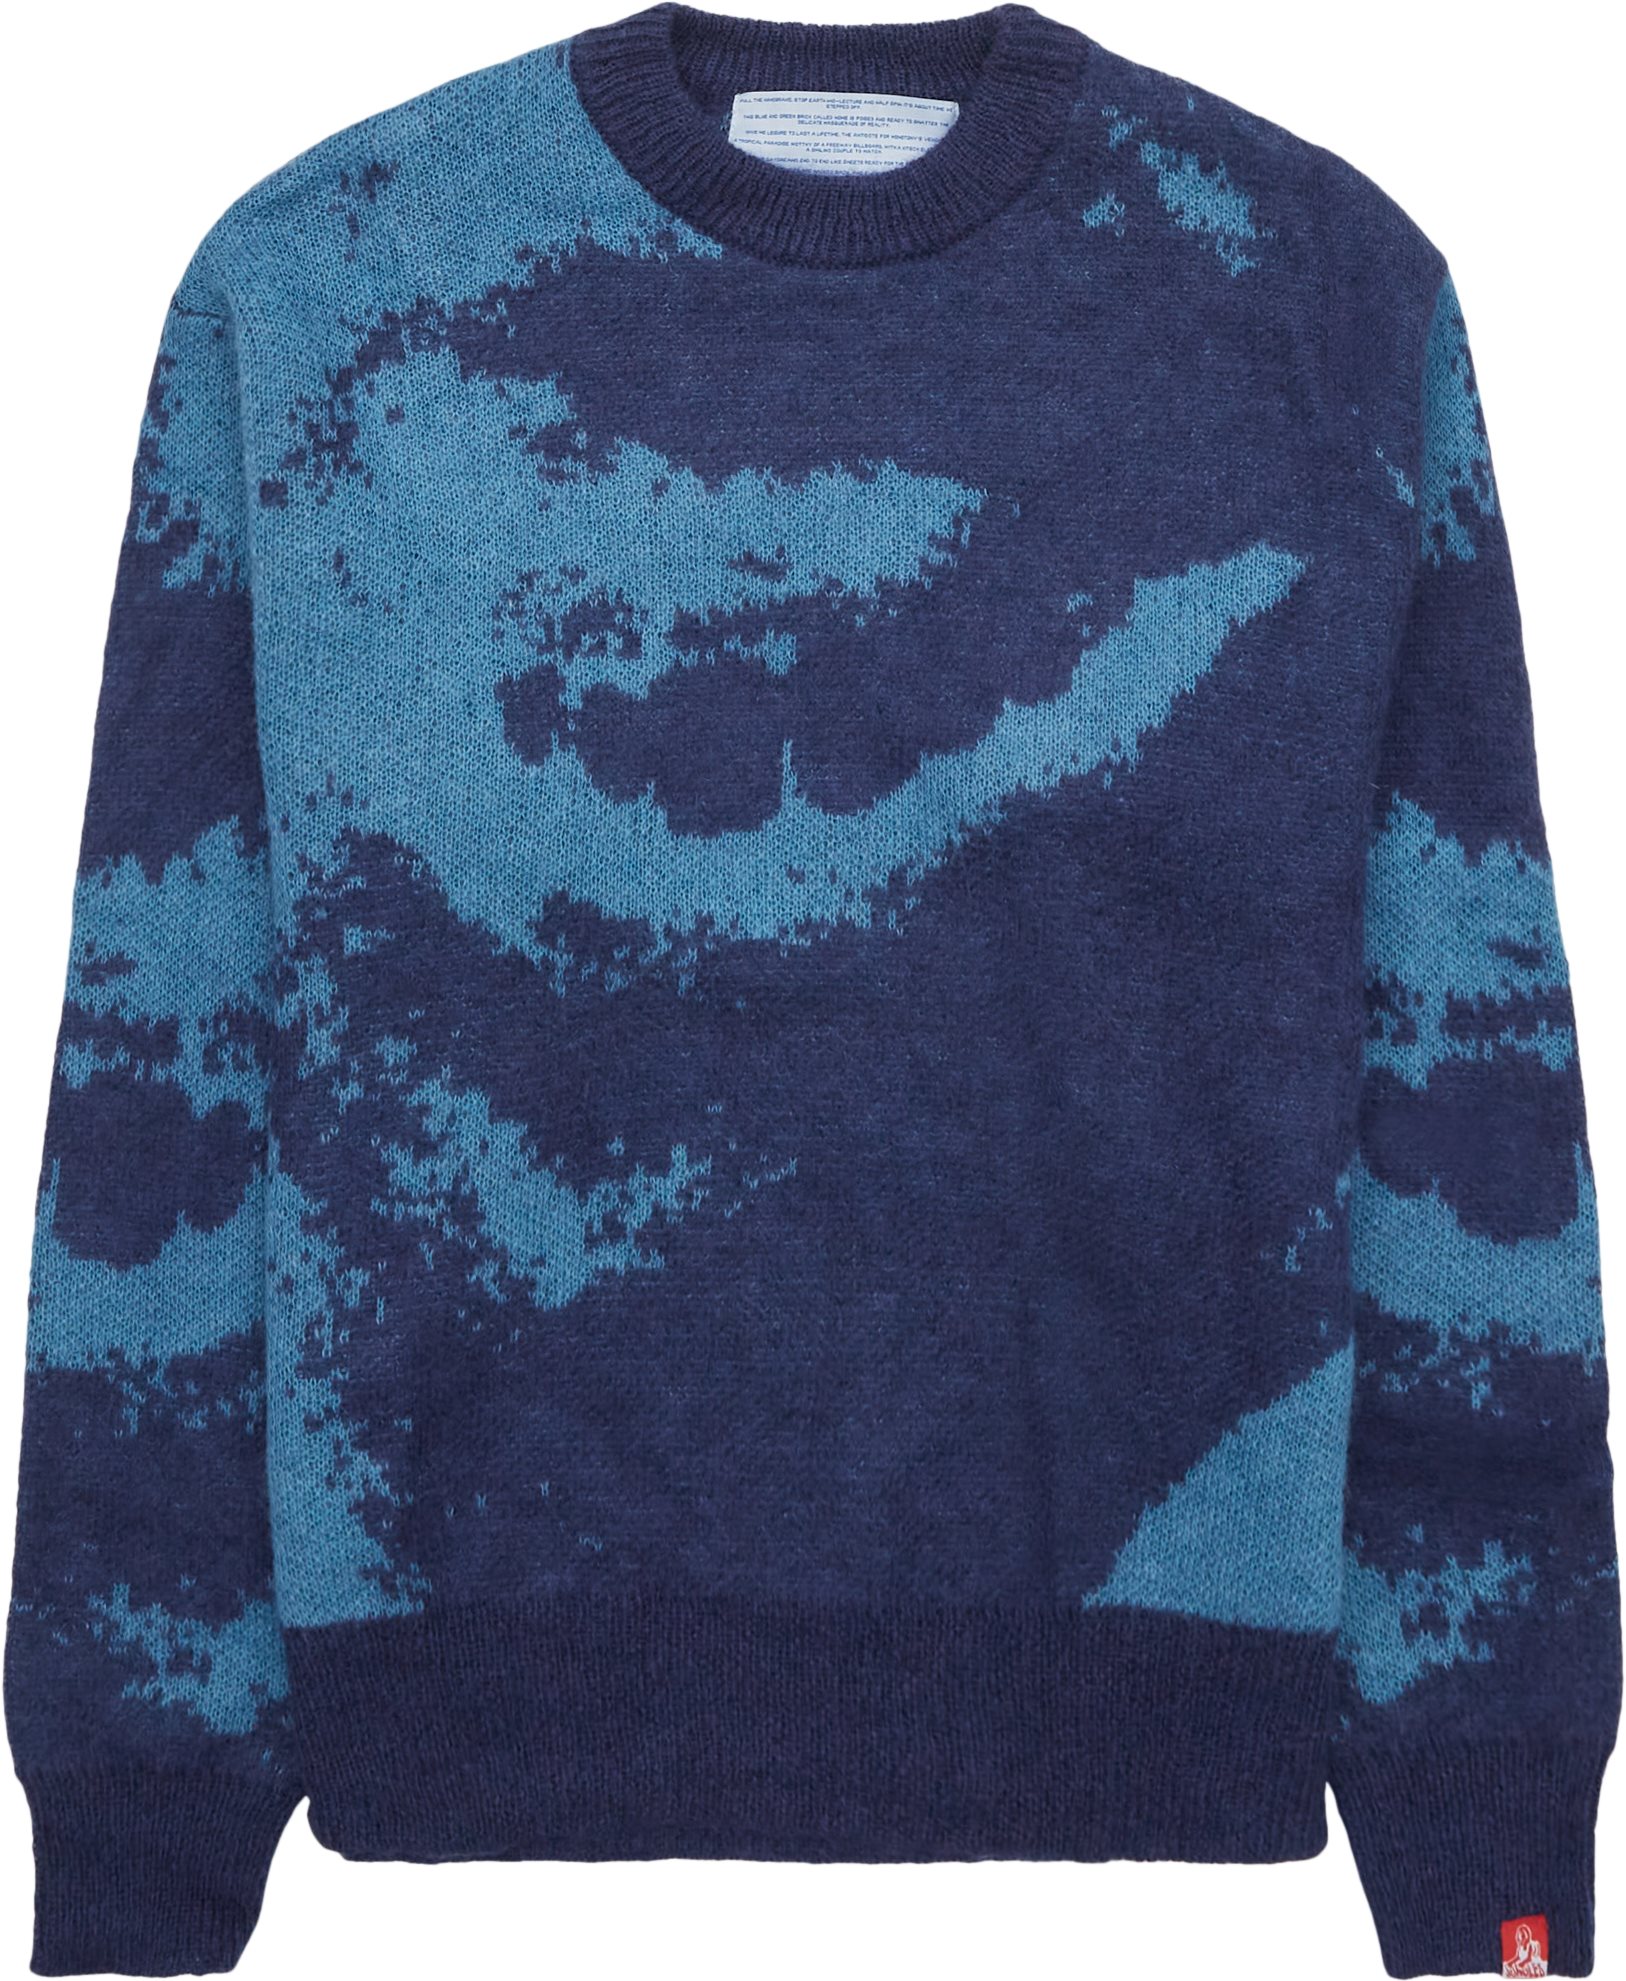 Jungles Jungles Knitwear SMILE KNITTED SWEATER Blue